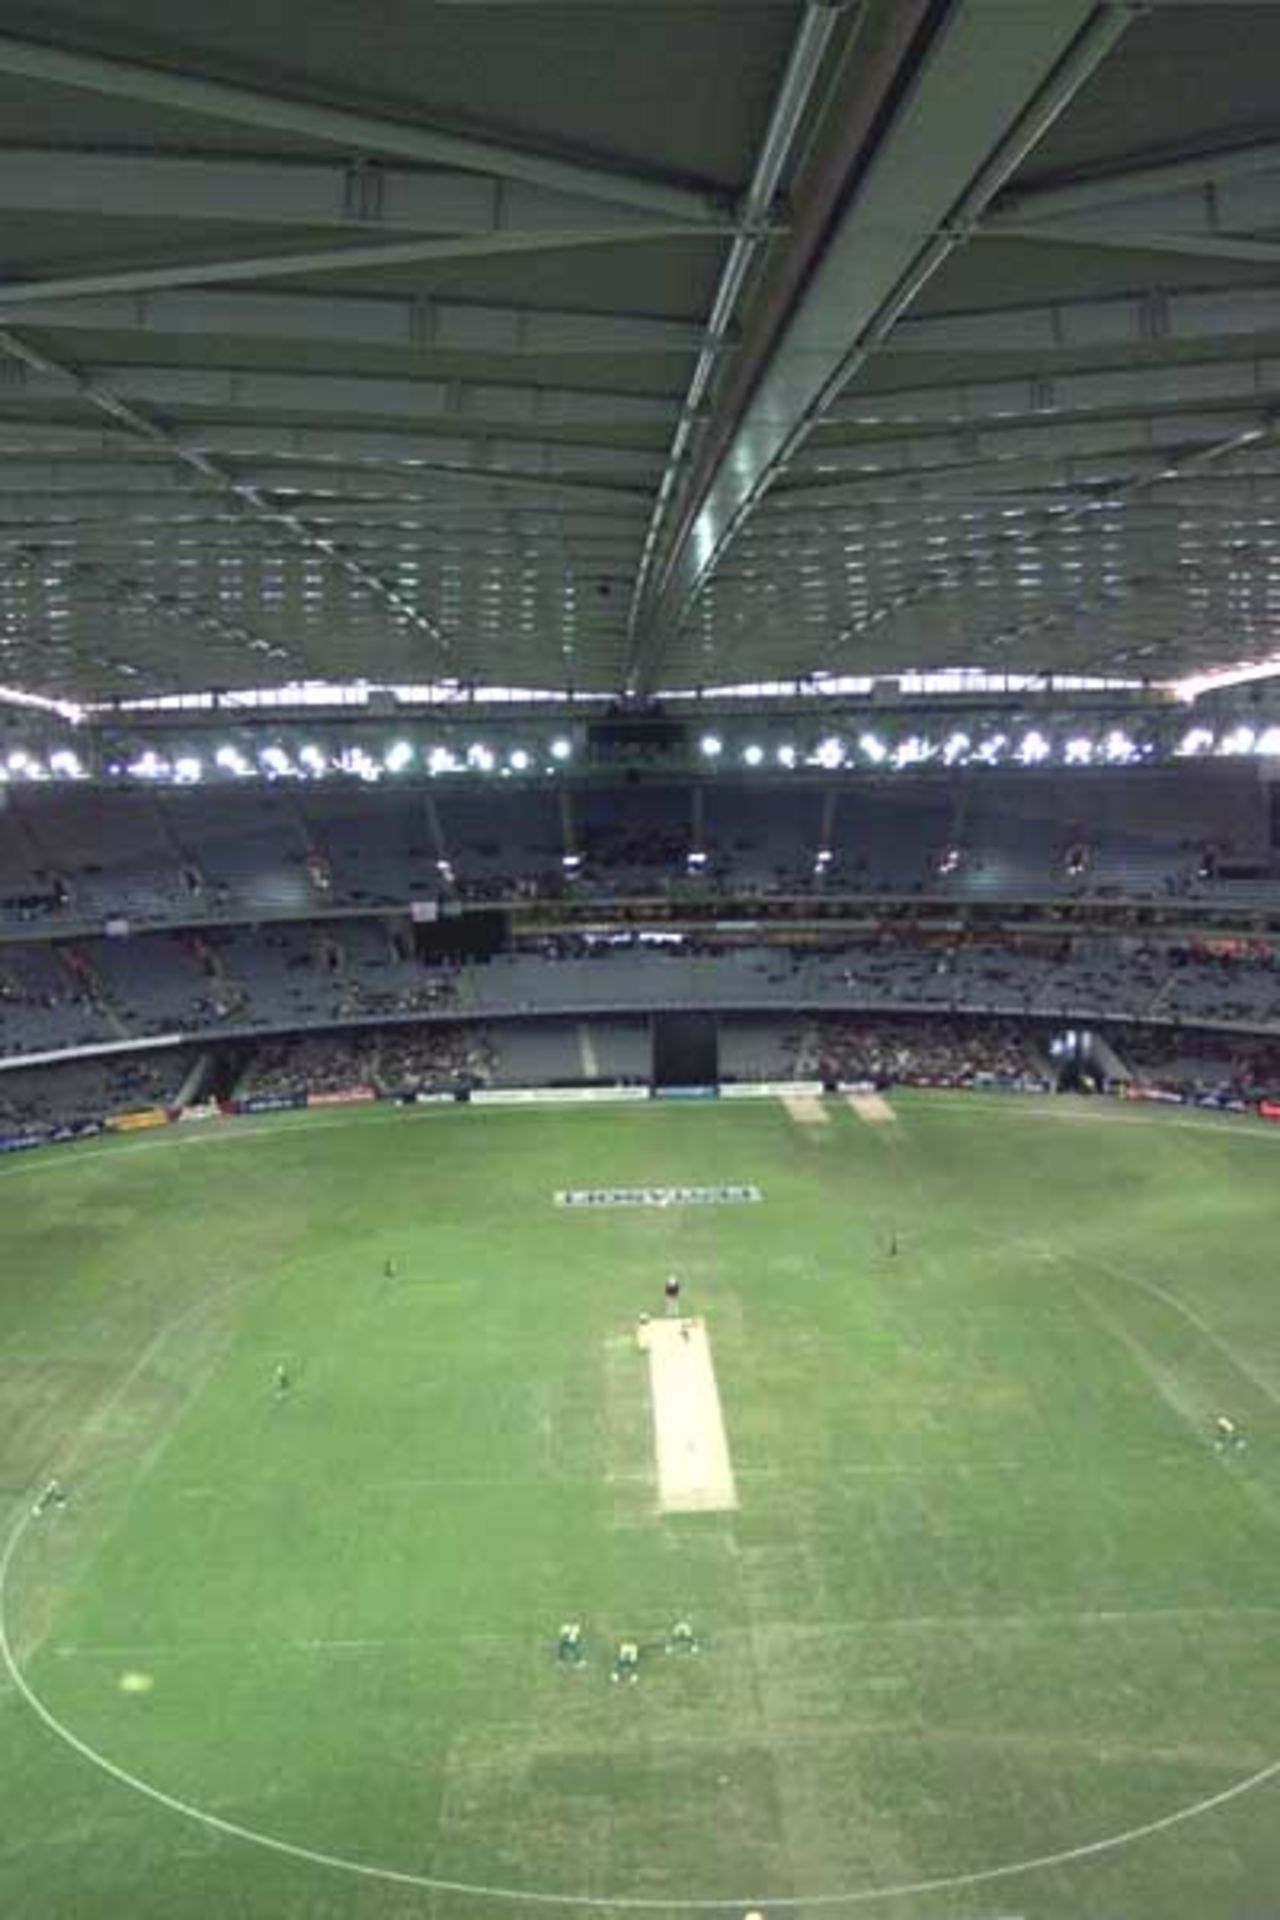 16 Aug 2000: General view of the match between Australia and South Africa, in game one of the Super Challenge 2000, played at Colonial Stadium in Melbourne, Australia. This is the first game of cricket to be played indoors.